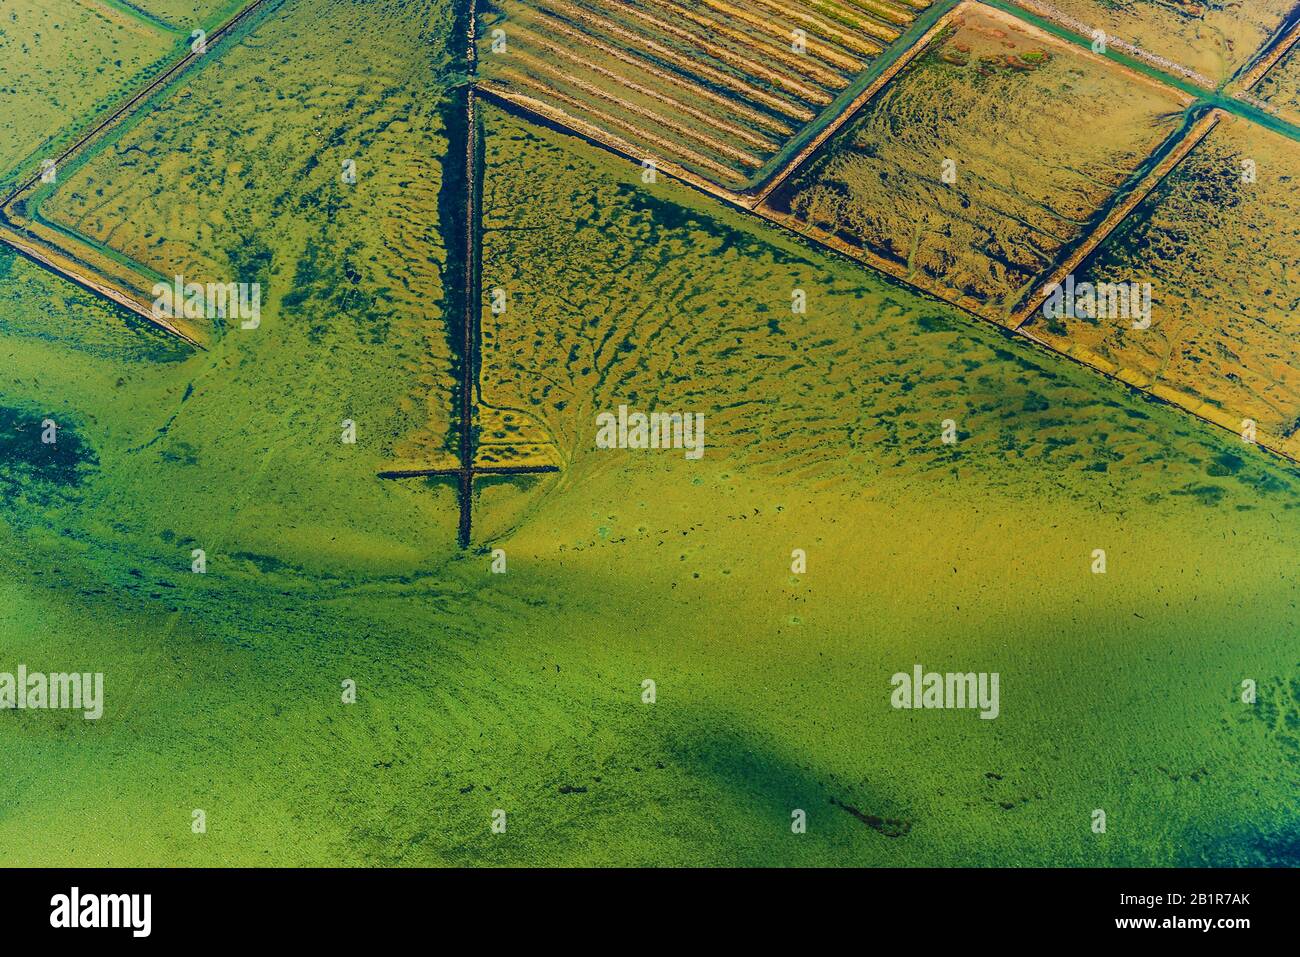 aerial view of the North Sea, barriers for land reclamation, Germany, Schleswig-Holstein, Schleswig-Holstein Wadden Sea National Park Stock Photo